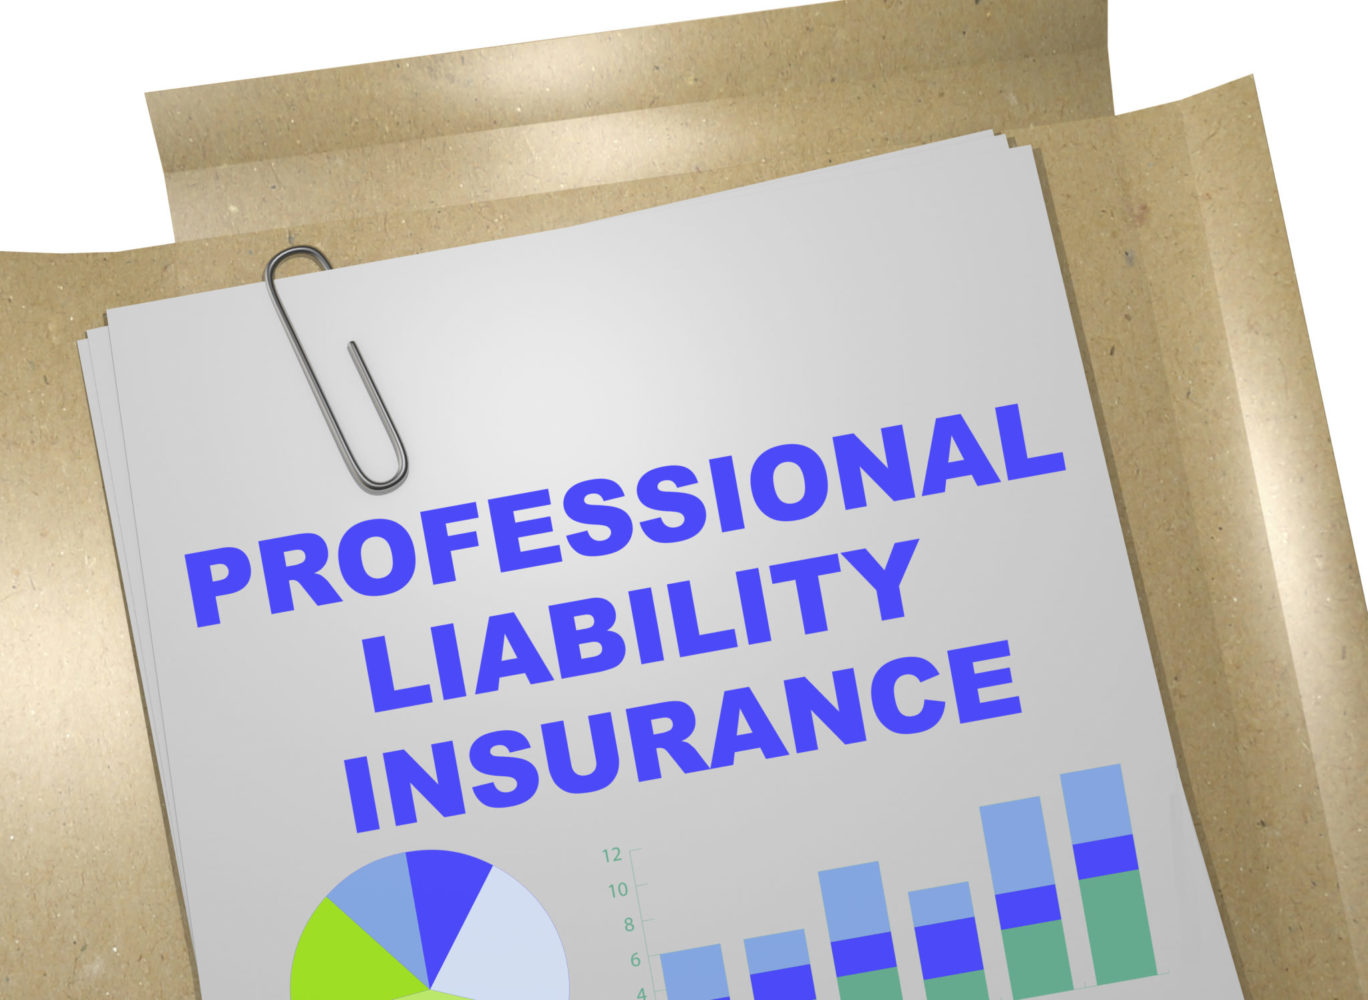 Online Professional Liability Insurance For A Business Consultant In Canada – Insurance Broker